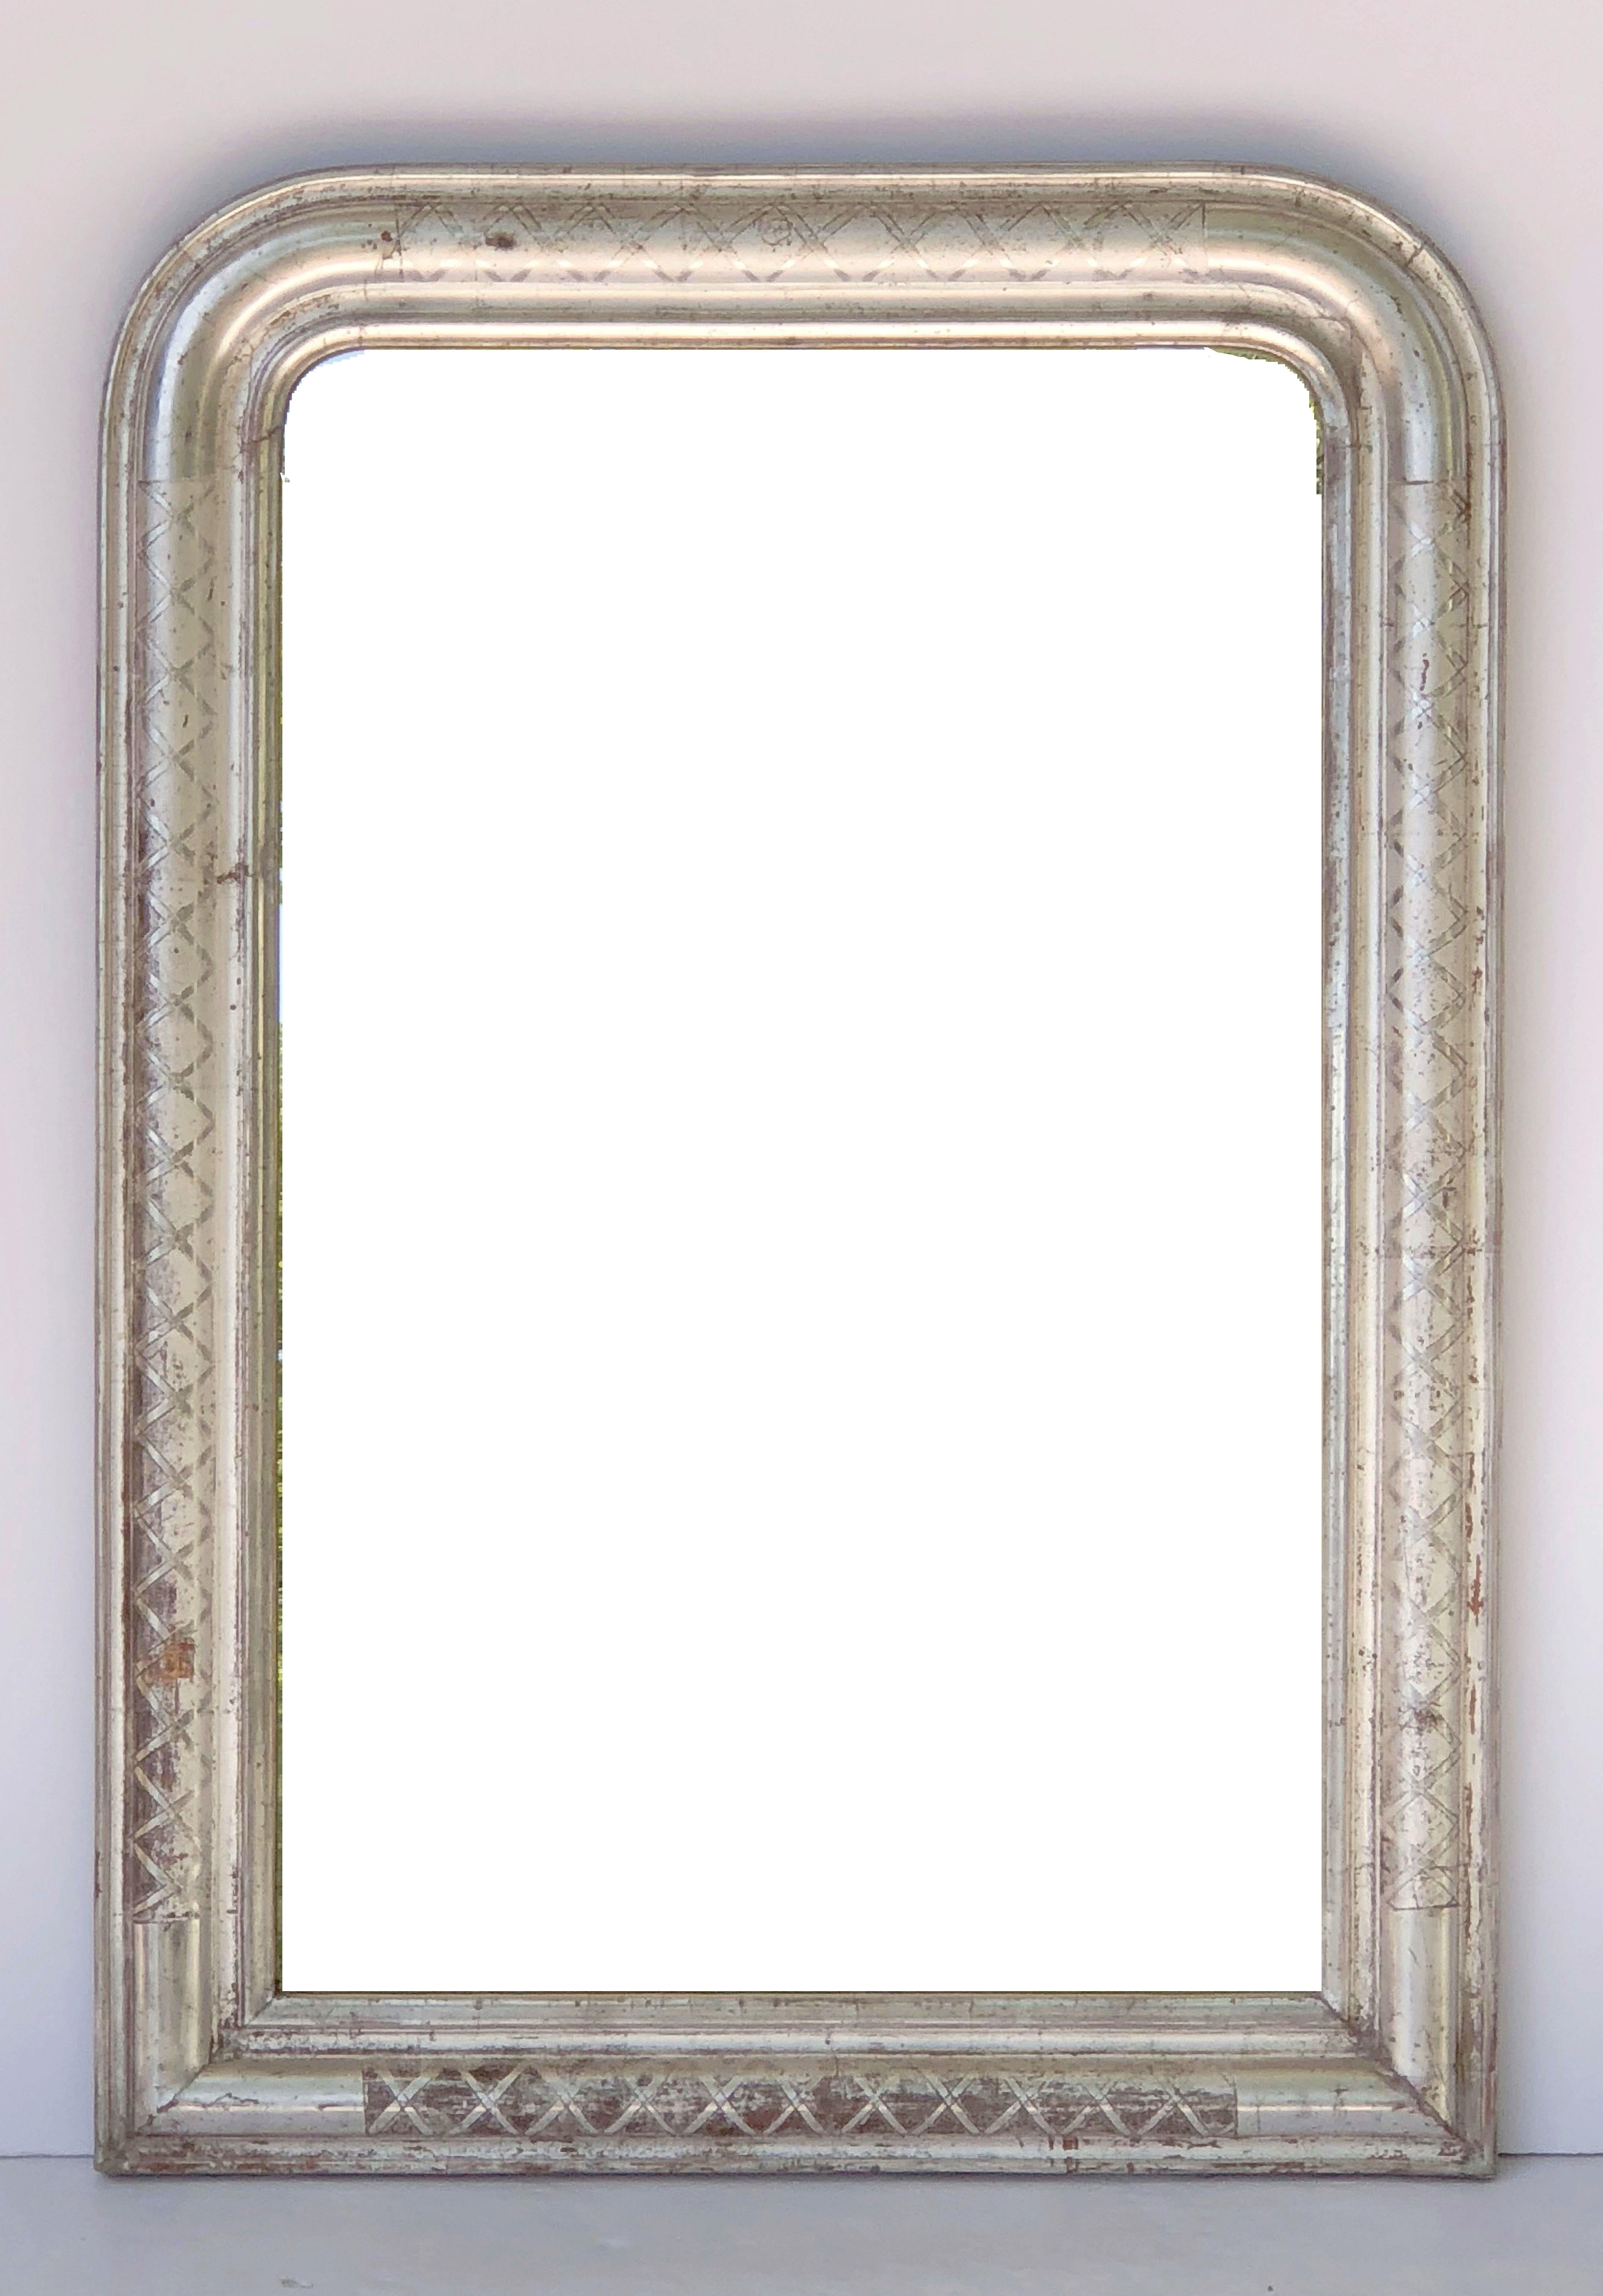 A fine Louis Philippe wall mirror from France, featuring a moulded surround with a beautiful patinated silver-leaf.

Dimensions: H 35 inches x W 24 3/4 inches

Other sizes available in this style.